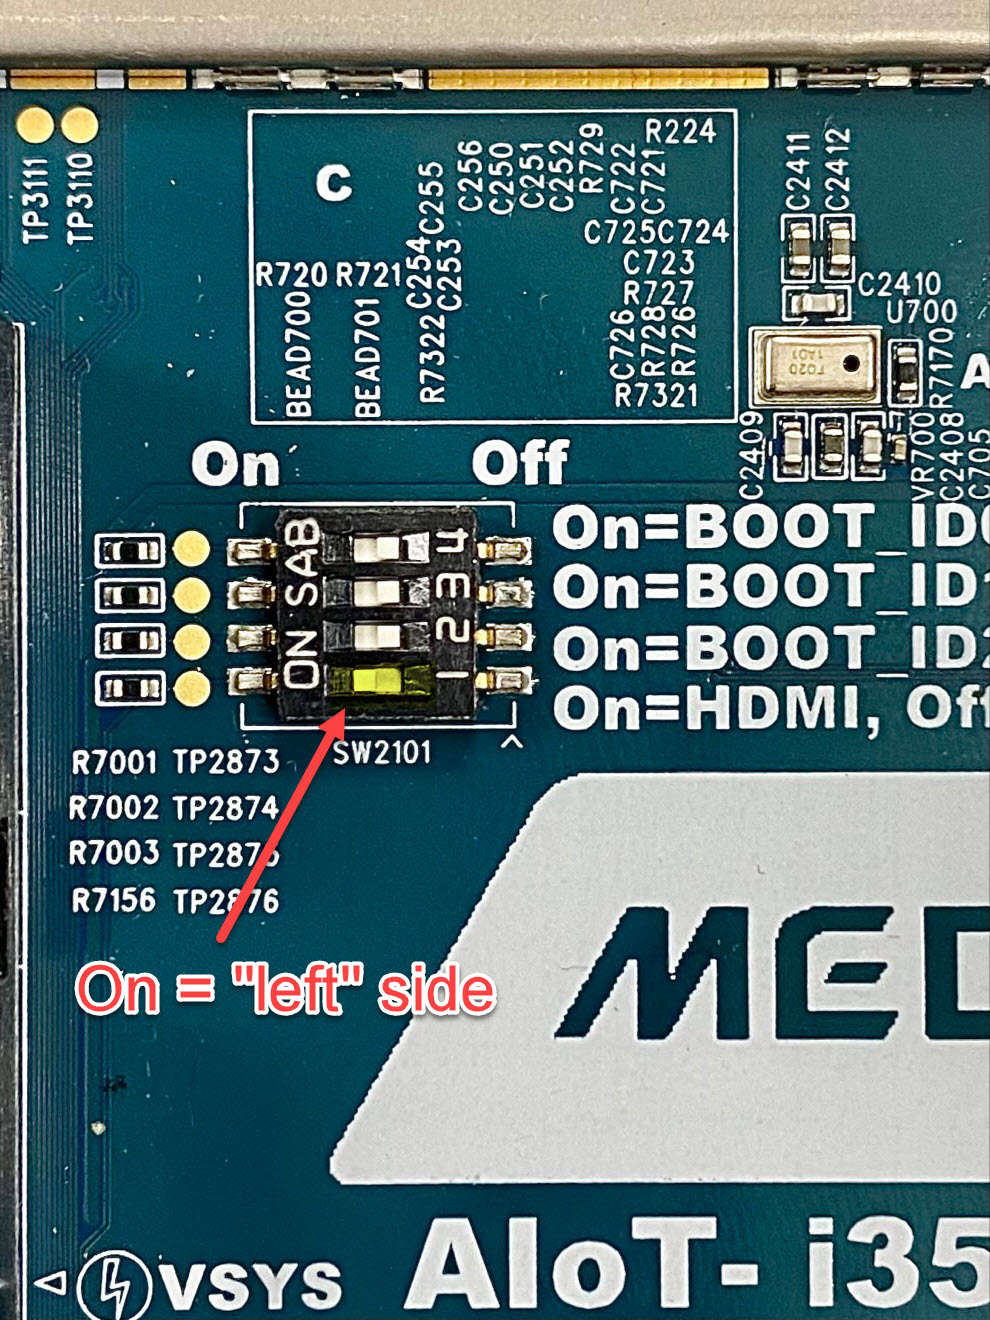 ../../../../_images/sw_yocto_app-dev_display_boot-switch-hdmi.jpg